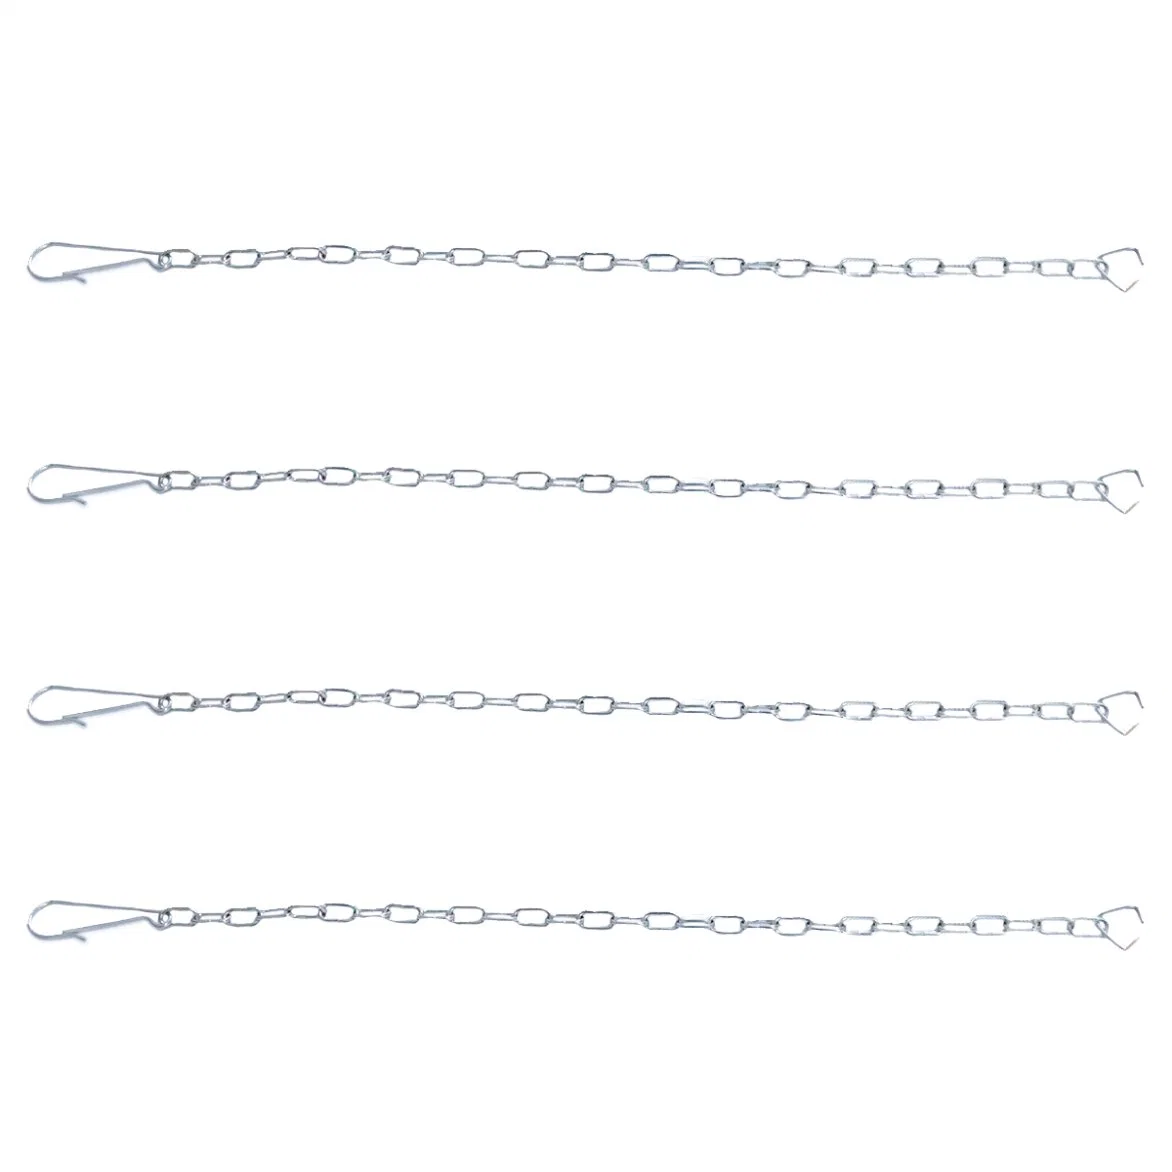 Fashion Accessories Metal Chain for Clothing Jewelry Shoulder Strap Handbag Neck Necklace